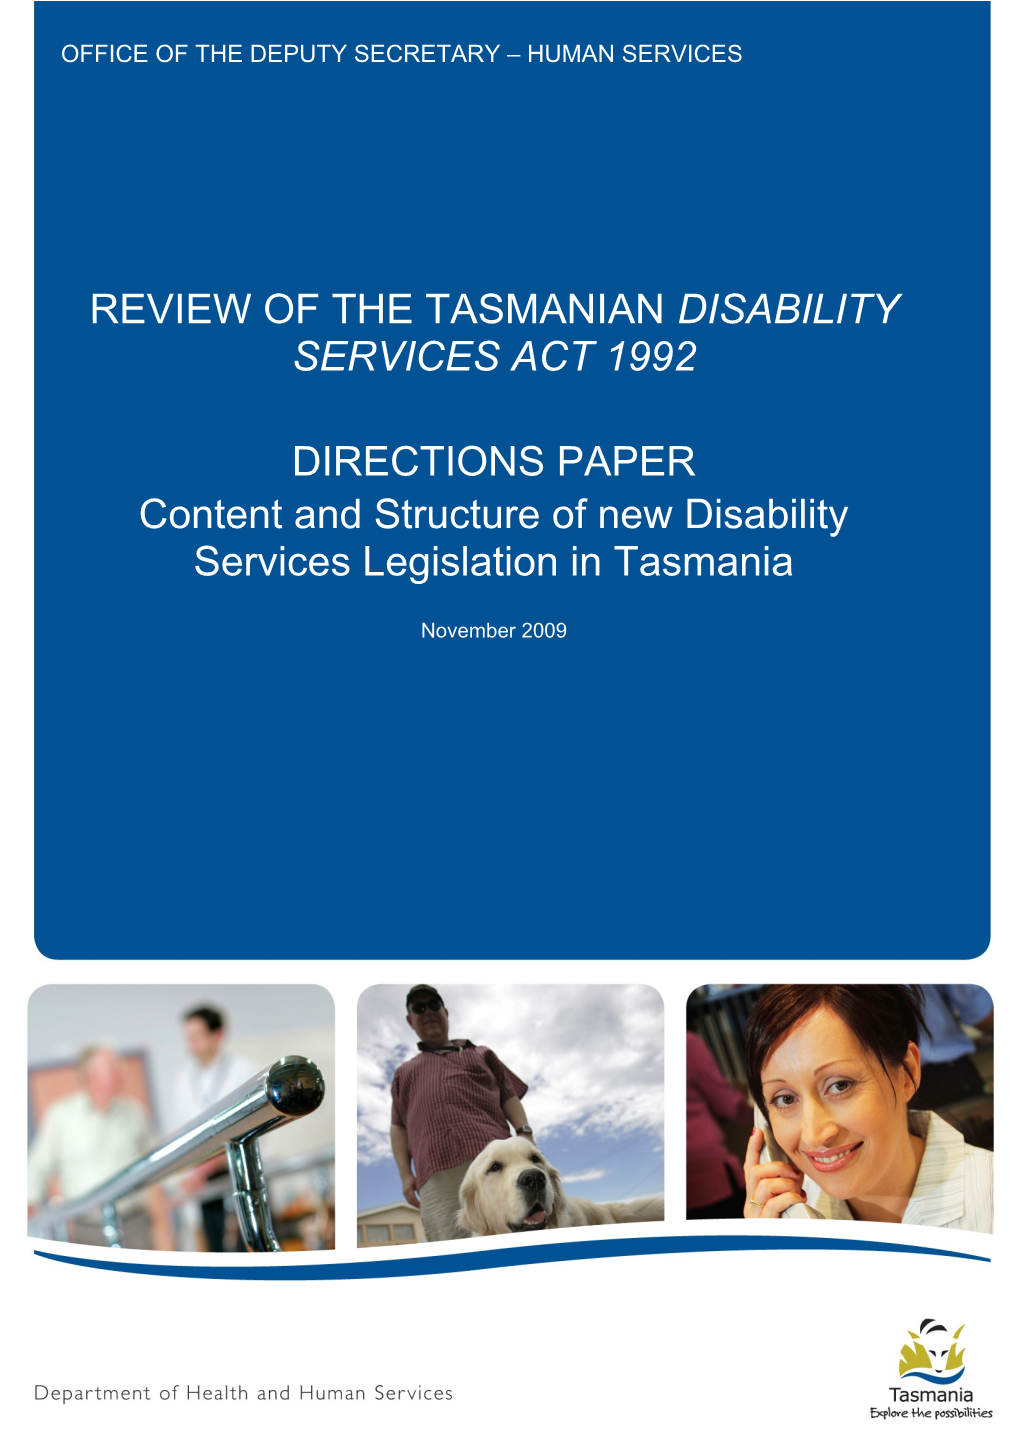 Review of Tasmanian Disability Services Act 1992